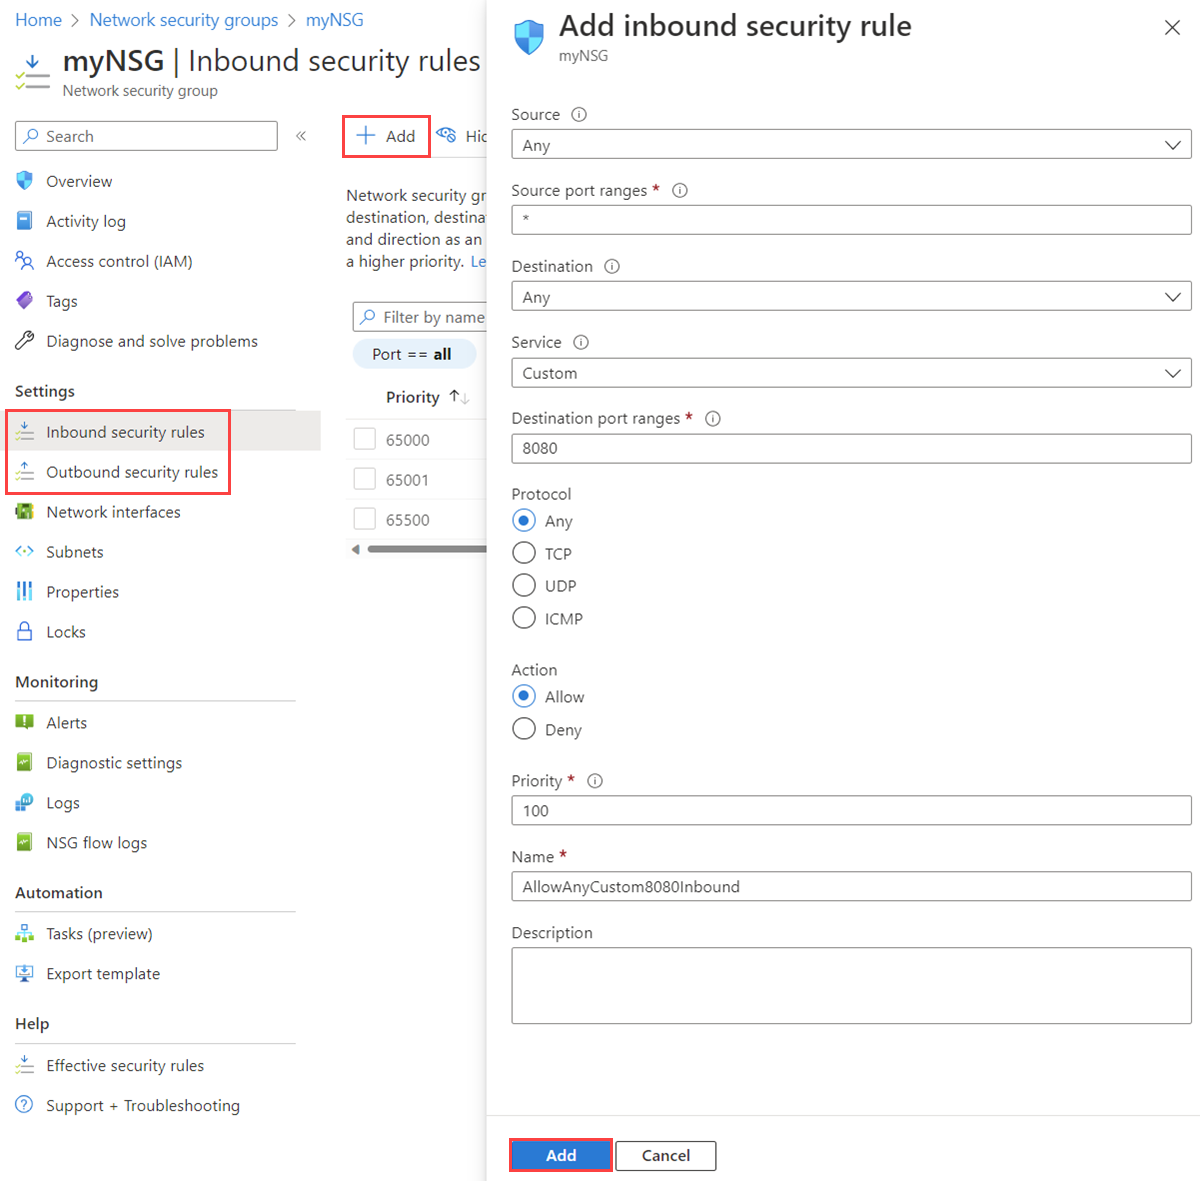 Screenshot of add a security rule to a network security group in Azure portal.